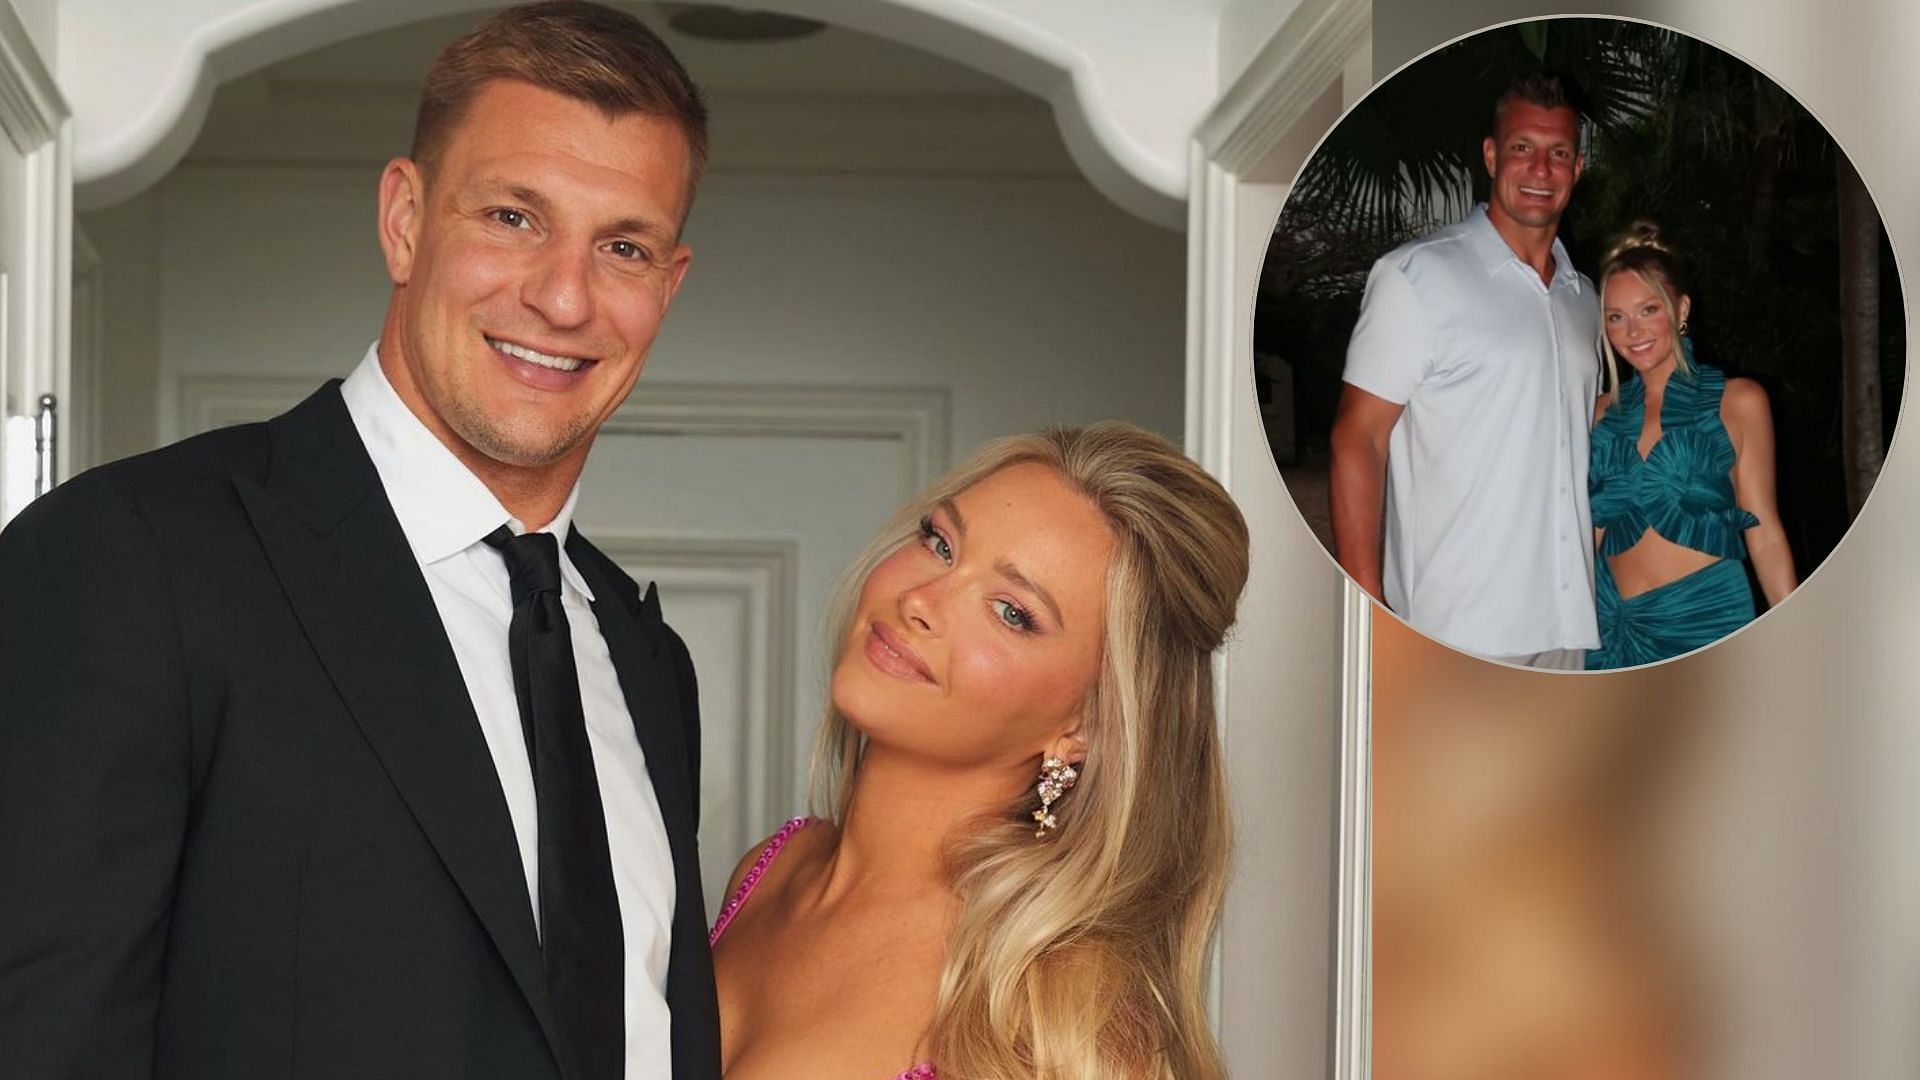 Rob Gronkowski jets off to the Caribbean with girlfriend Camille Kostek days after roasting Tom Brady for Netflix 